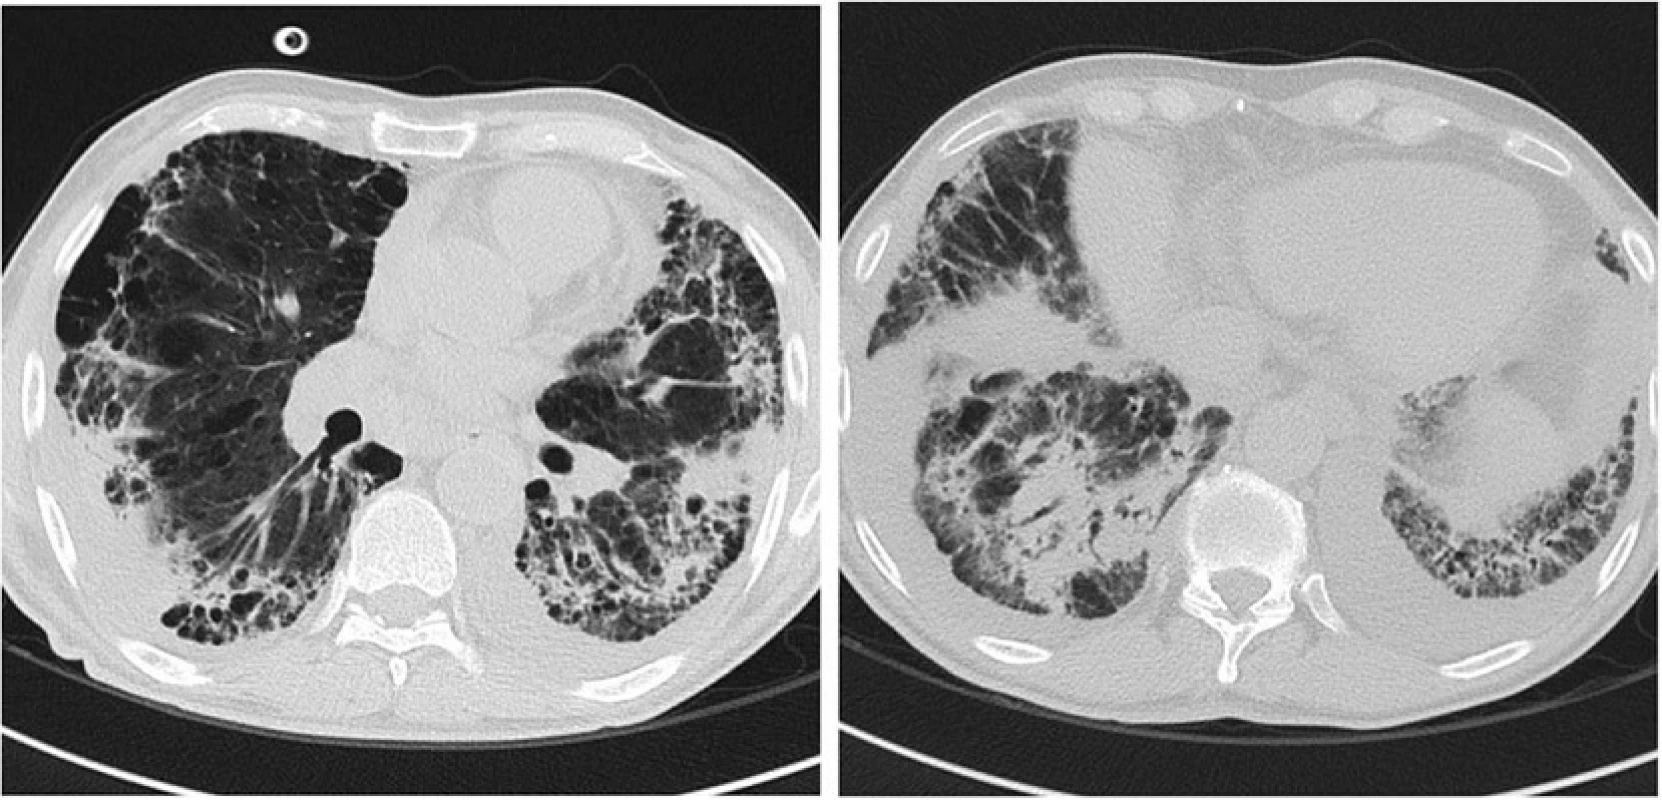 Chest CT scan image after 14 days of broad-spectrum therapy with deteriorating respiratory condition: increase in size and number of the parenchymal consolidation and ground-glass areas, consistent with ongoing pneumonia